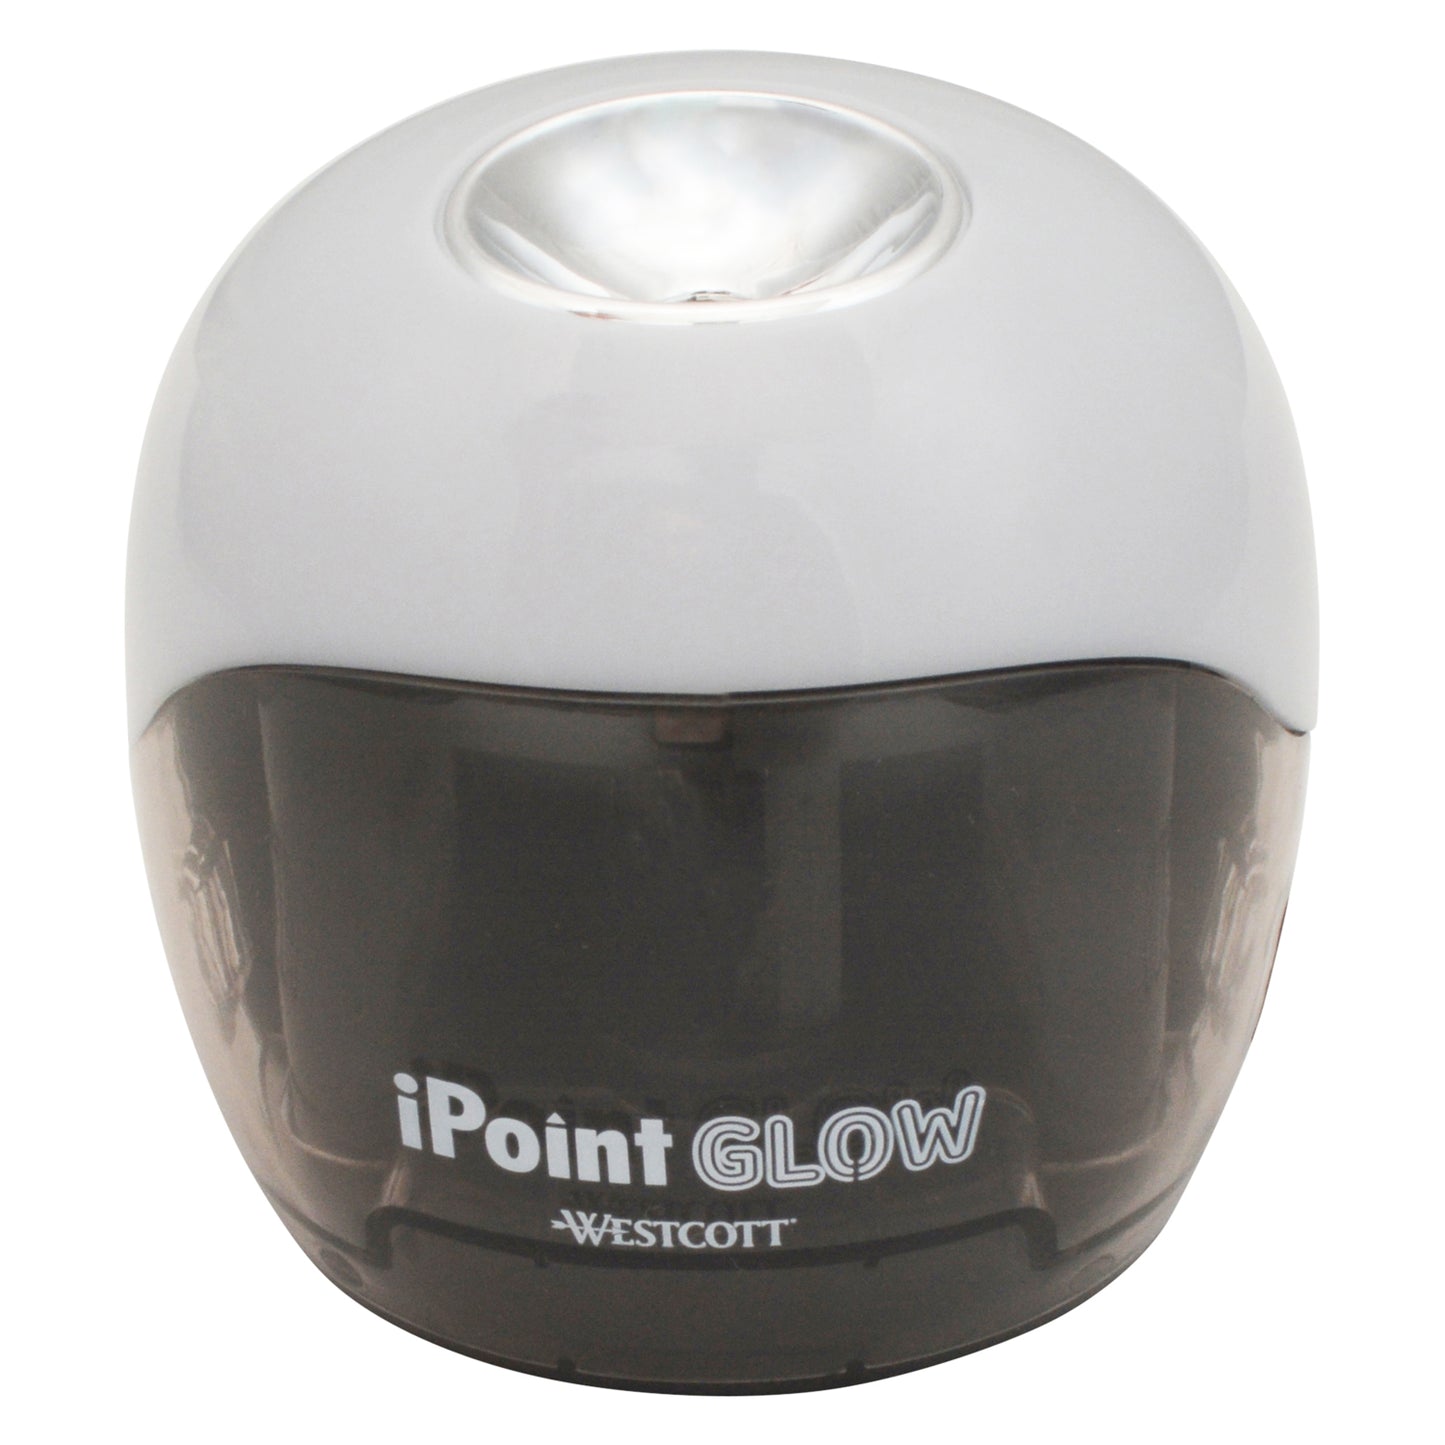 iPoint® Glow Color Changing Battery Pencil Sharpener, Assorted Colors (No Color Choice)